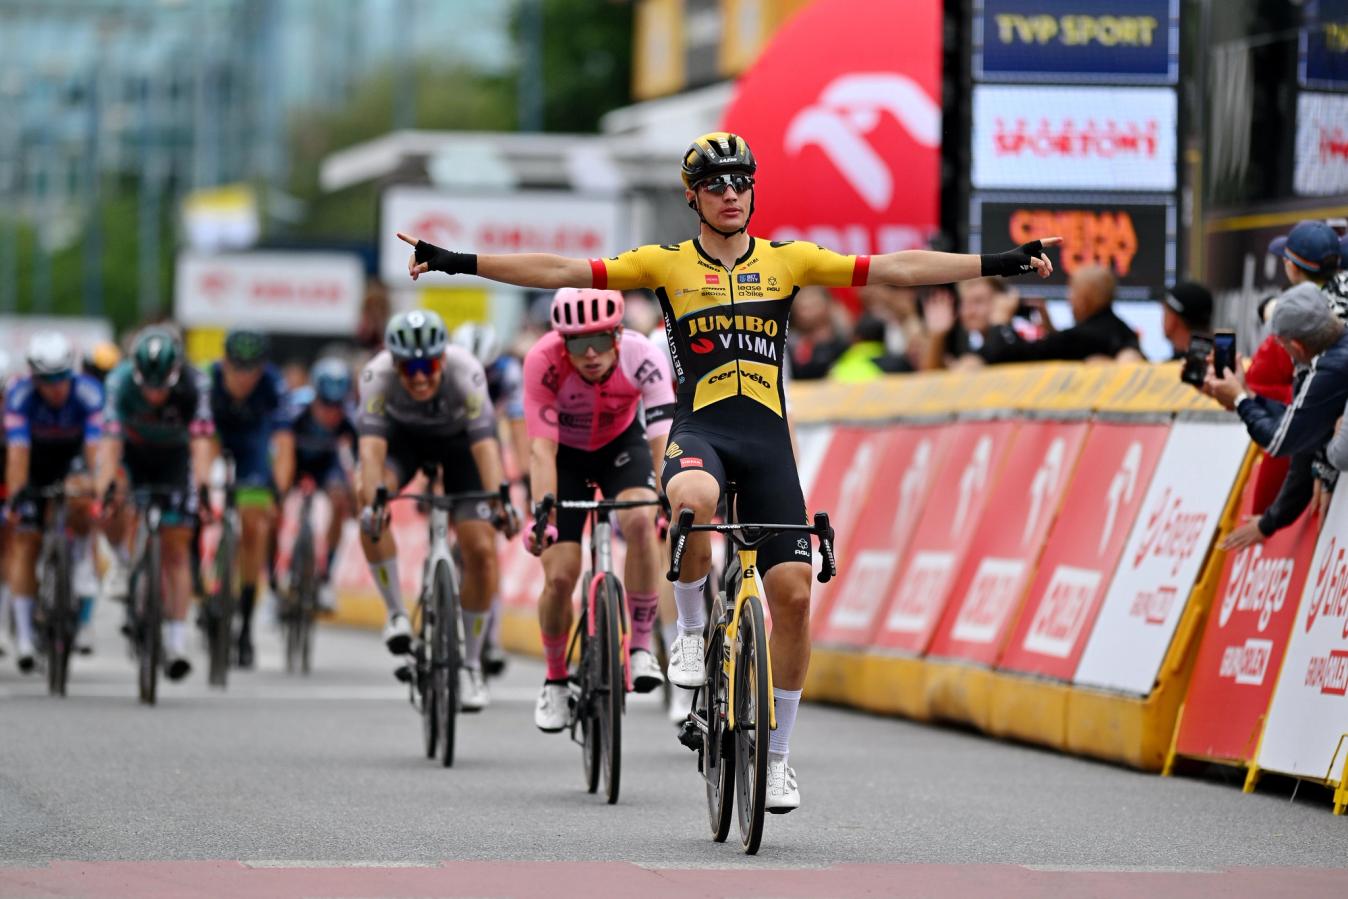 Despite not yet starting a Grand Tour, Olav Kooij is making a name for himself as one of the sport’s quickest sprinters